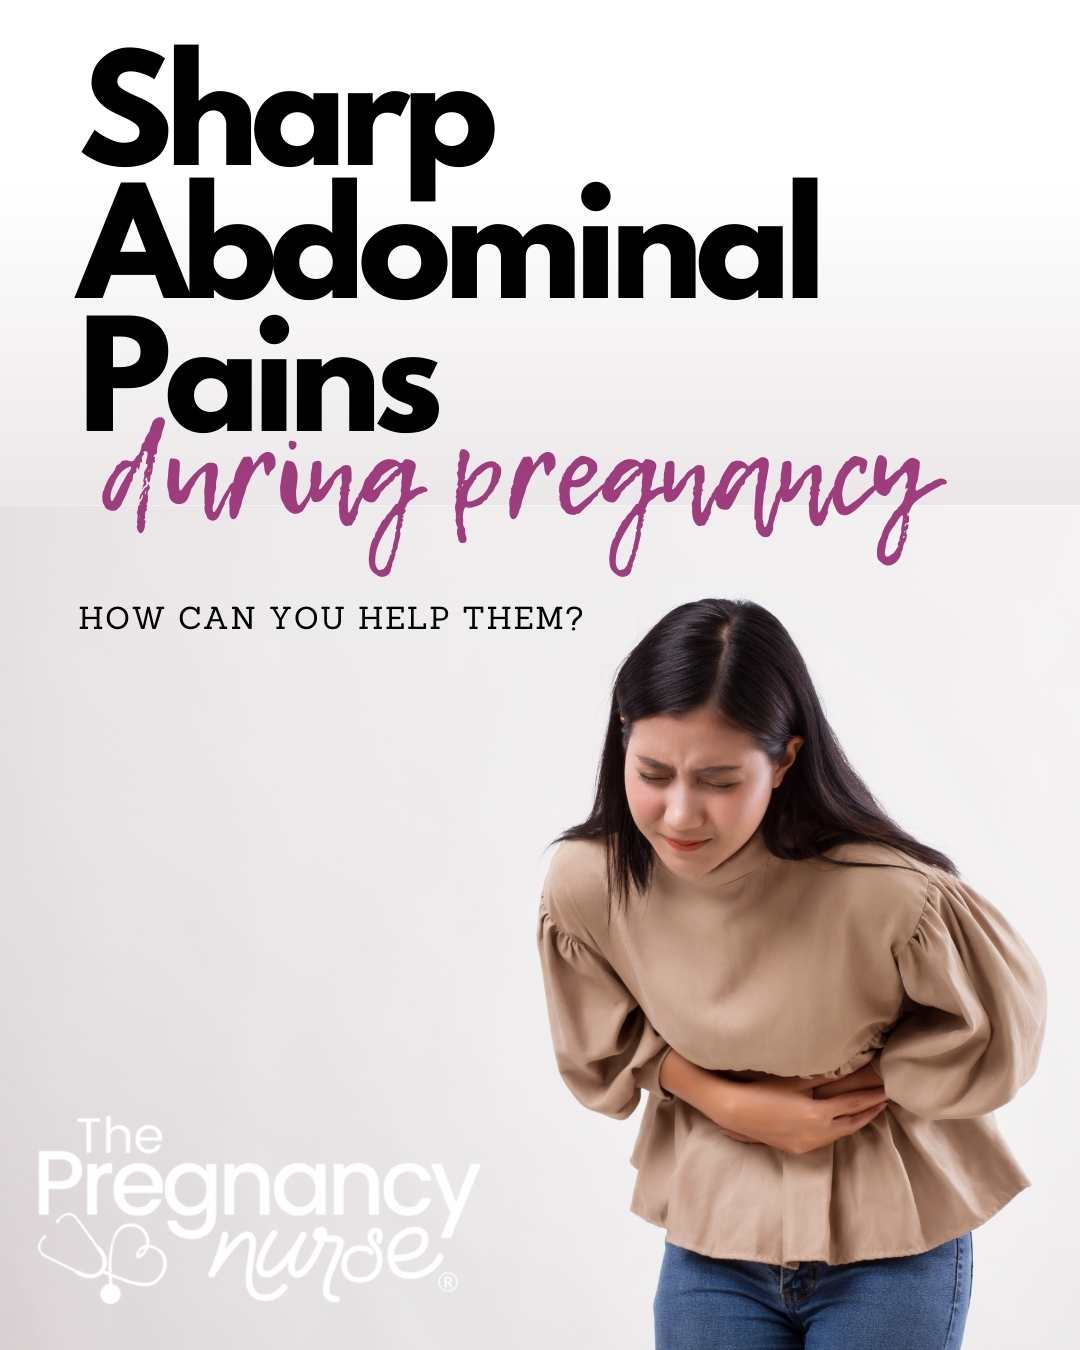 Journey through the ups and downs of being 21 weeks pregnant with this empowering guide. Understand, manage, and alleviate sharp lower abdominal pains. Don't let discomfort overshadow your incredible journey into motherhood. Embark on this path equipped with knowledge and comfort tips!